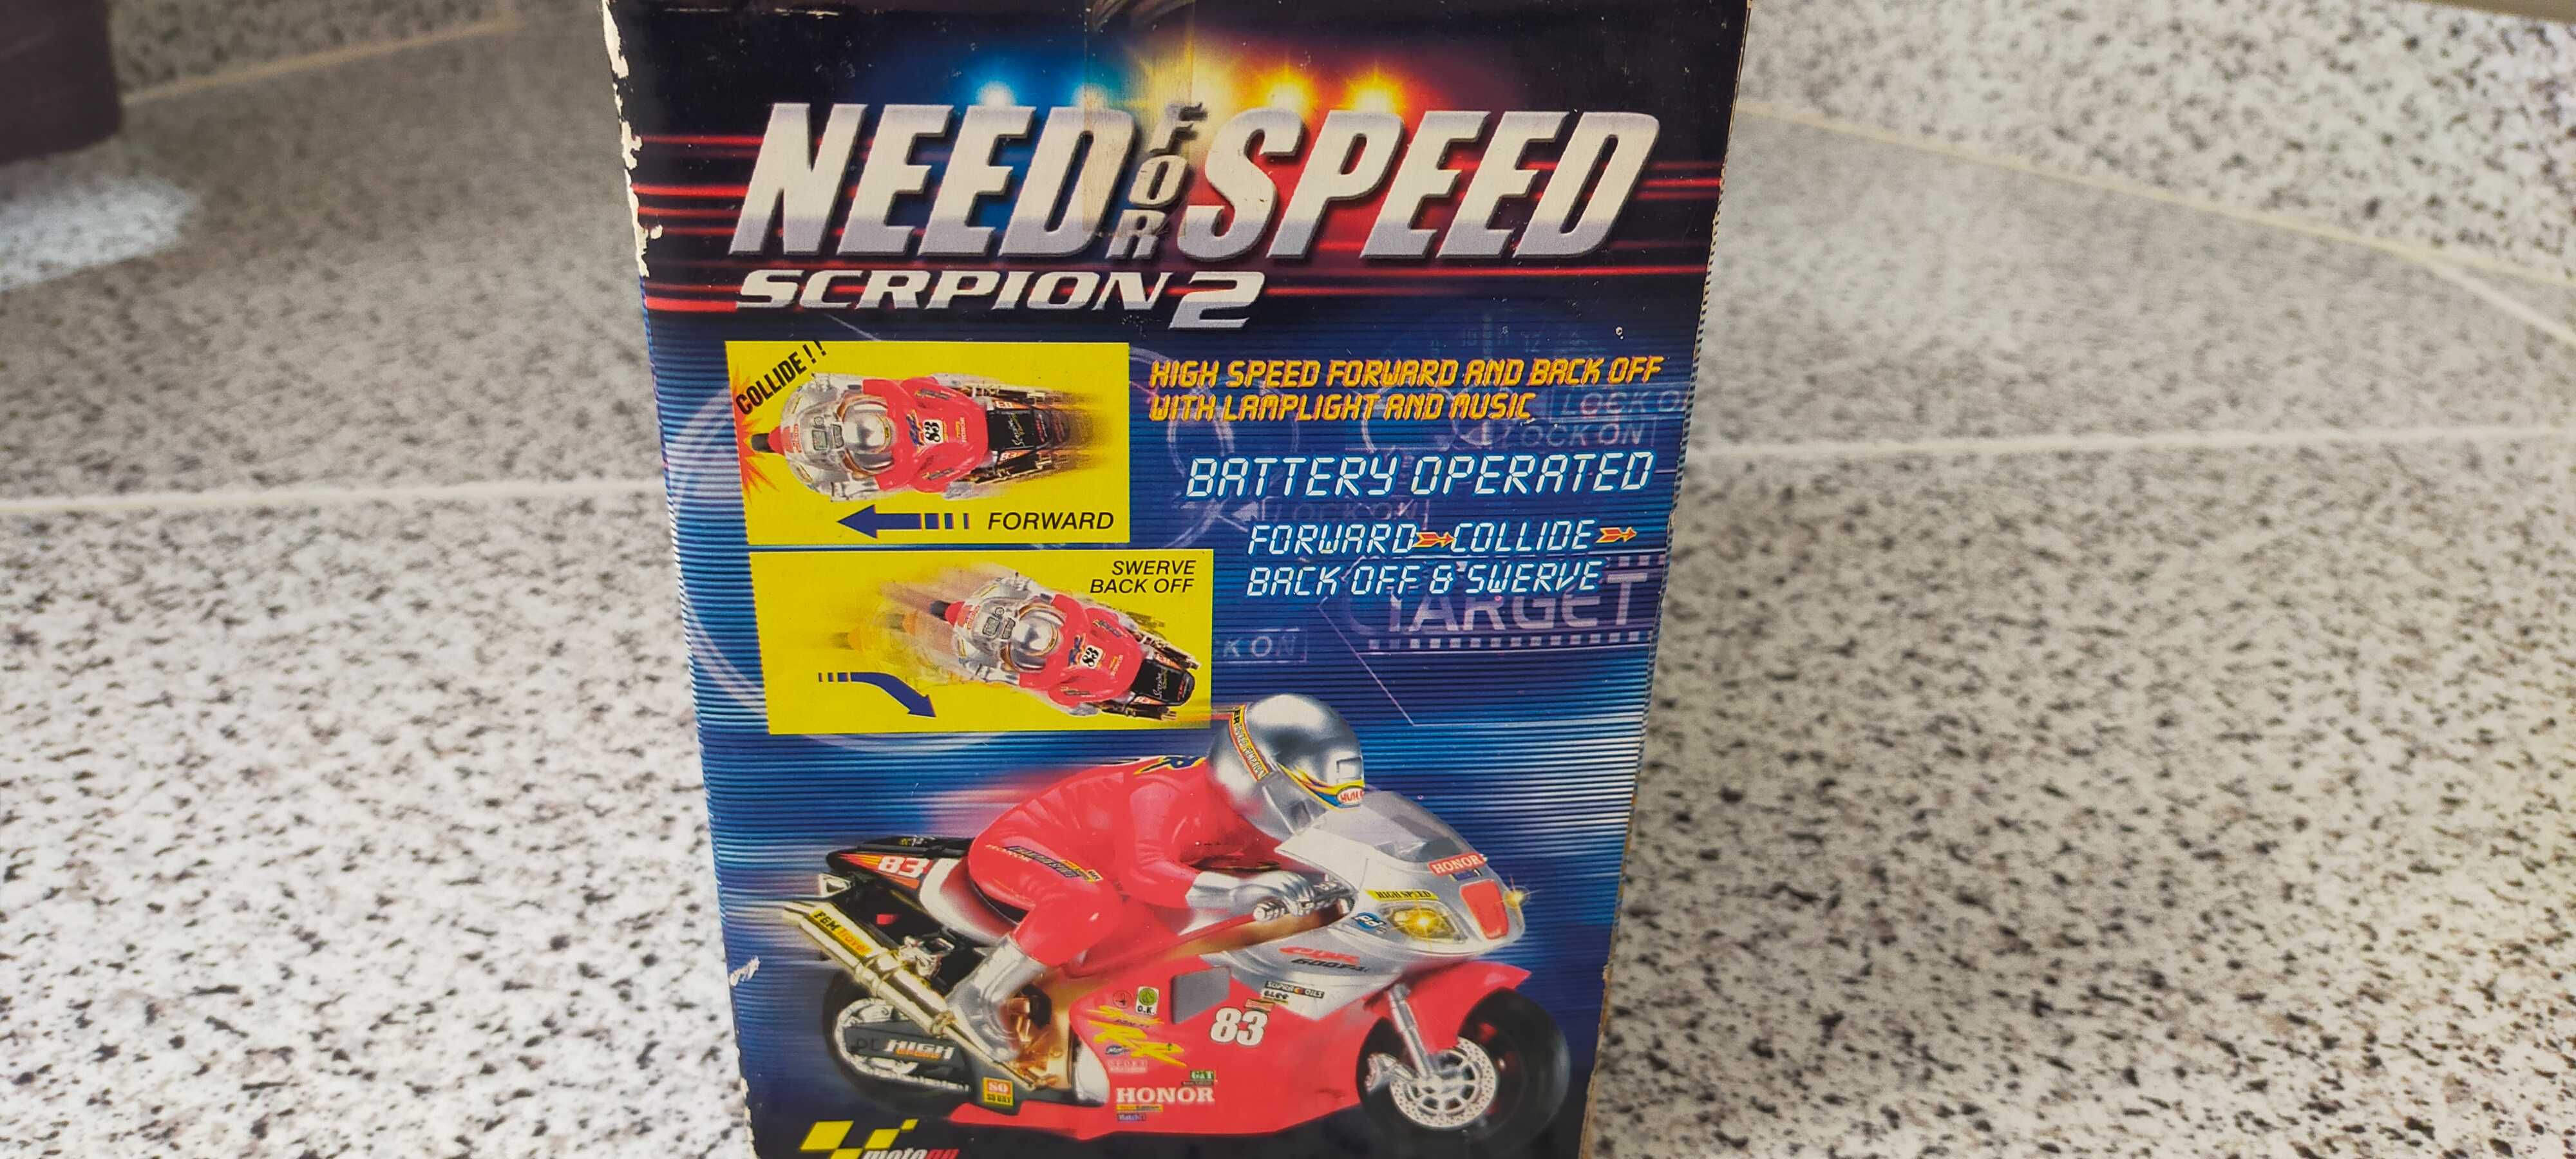 Need for speed Scrpion2 Motorcycle Racing com Caixa